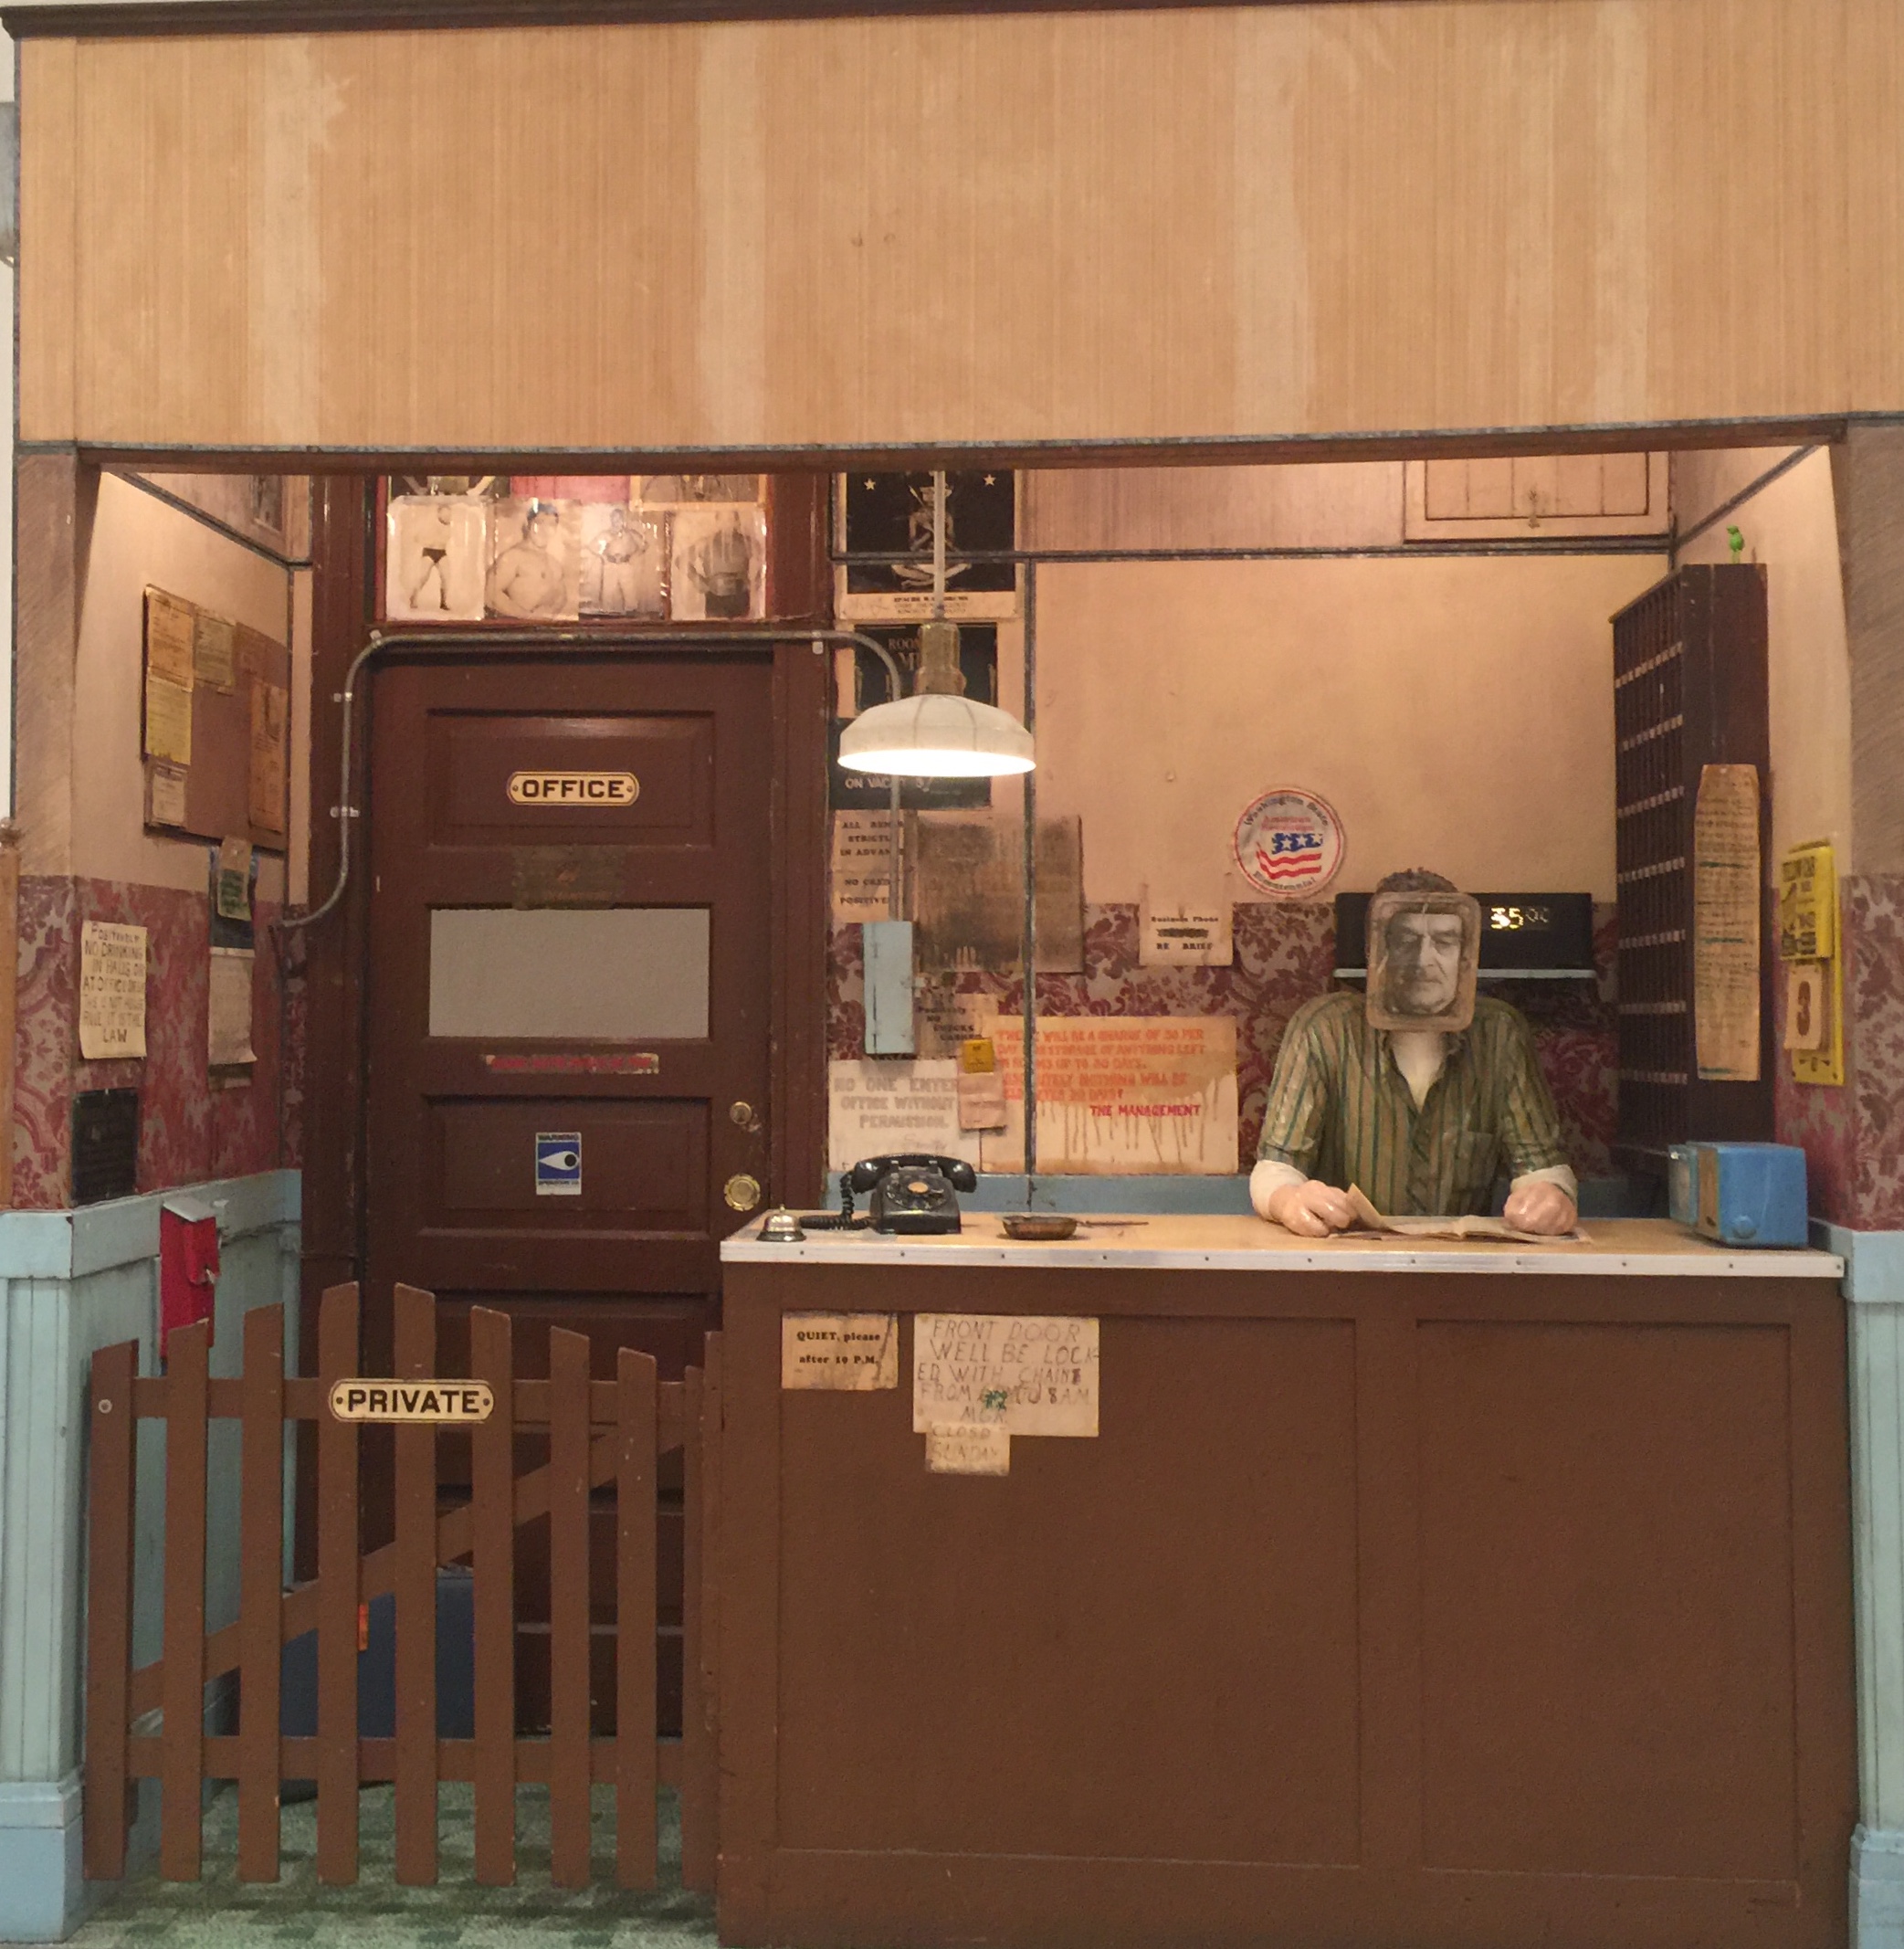 Art piece display a night clerk in a setting resembling a decrepit hotel office